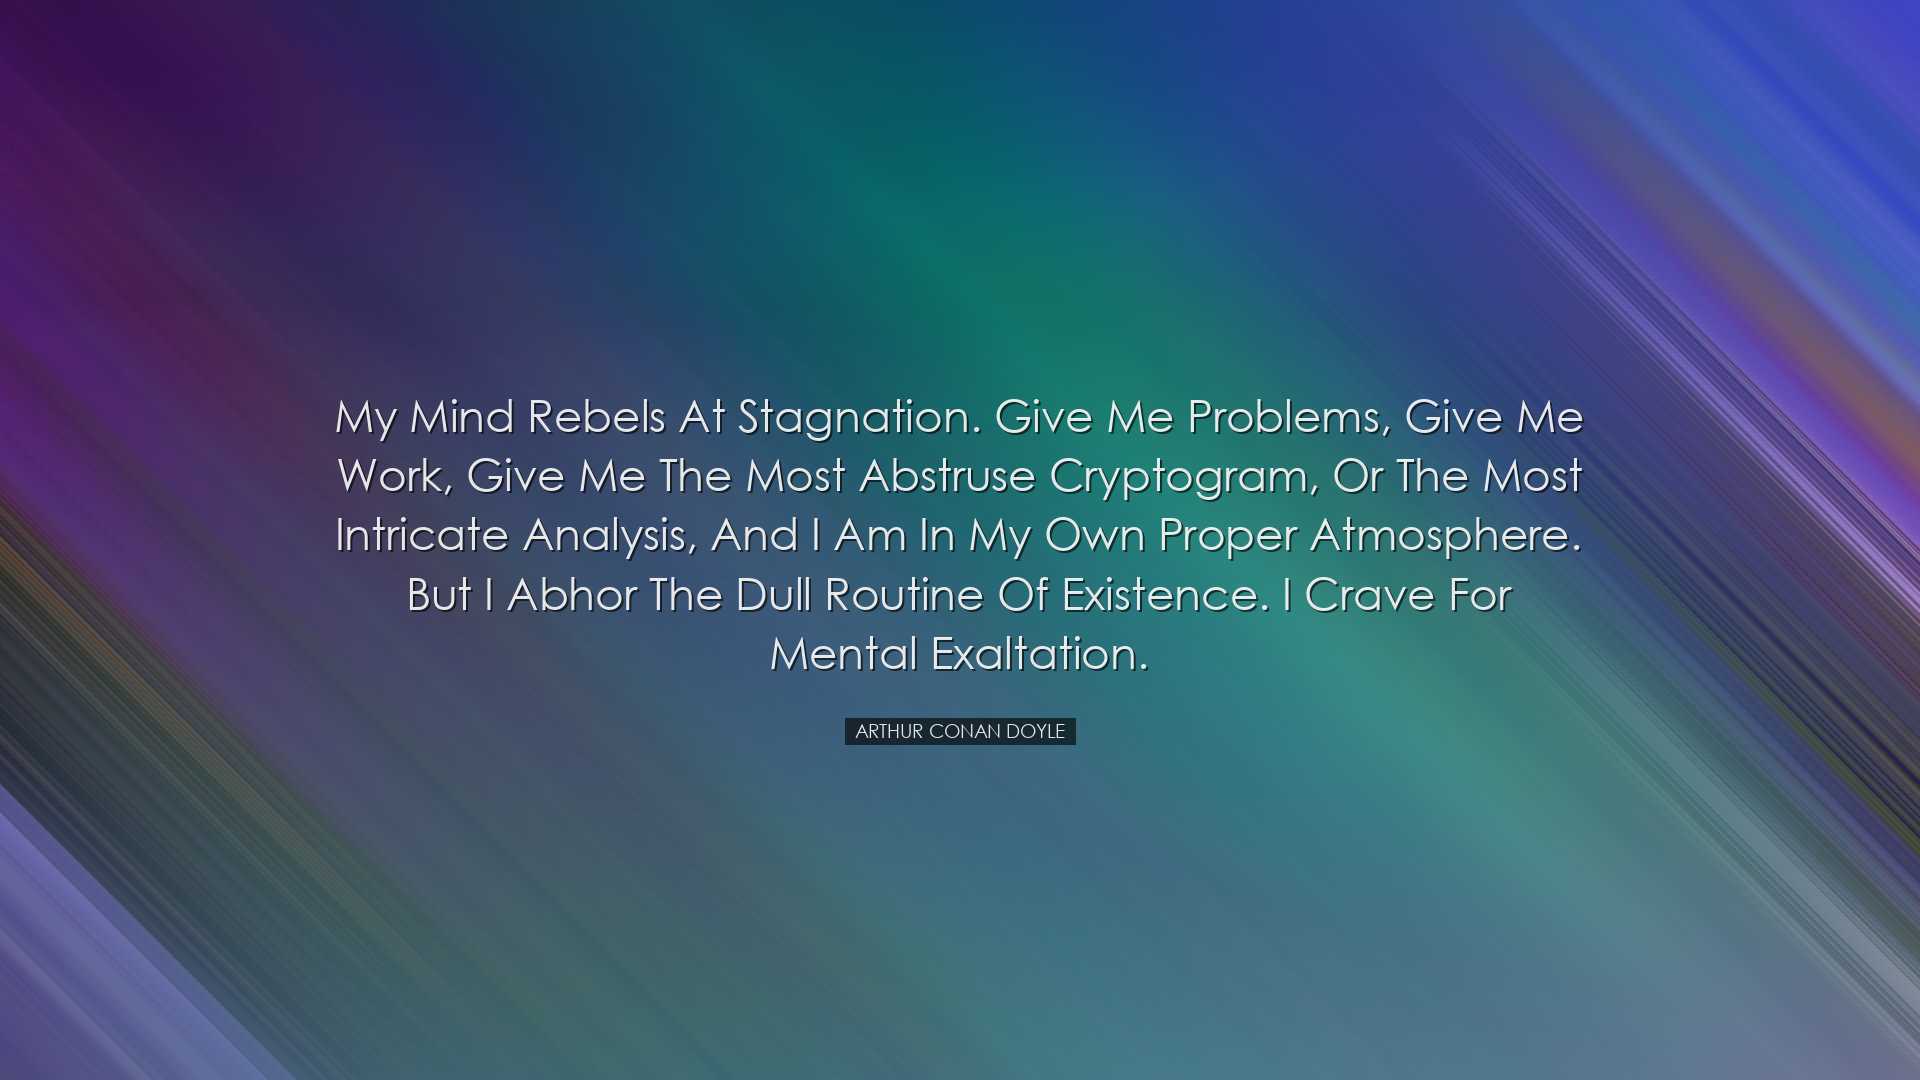 My mind rebels at stagnation. Give me problems, give me work, give